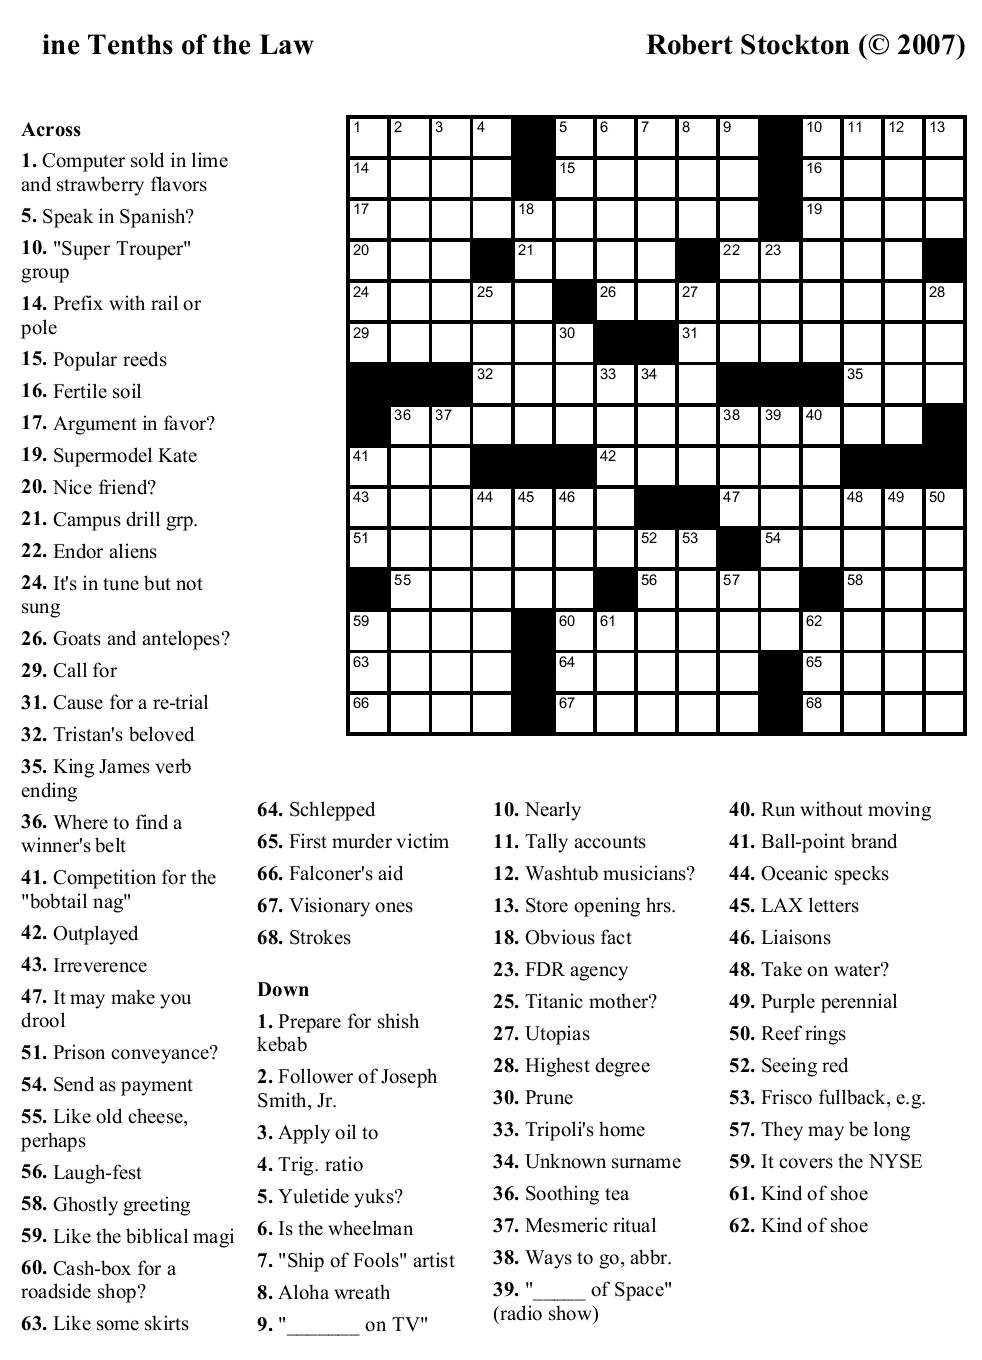 Crossword Puzzles Printable - Yahoo Image Search Results | Crossword - Printable Crossword Puzzle With Clues